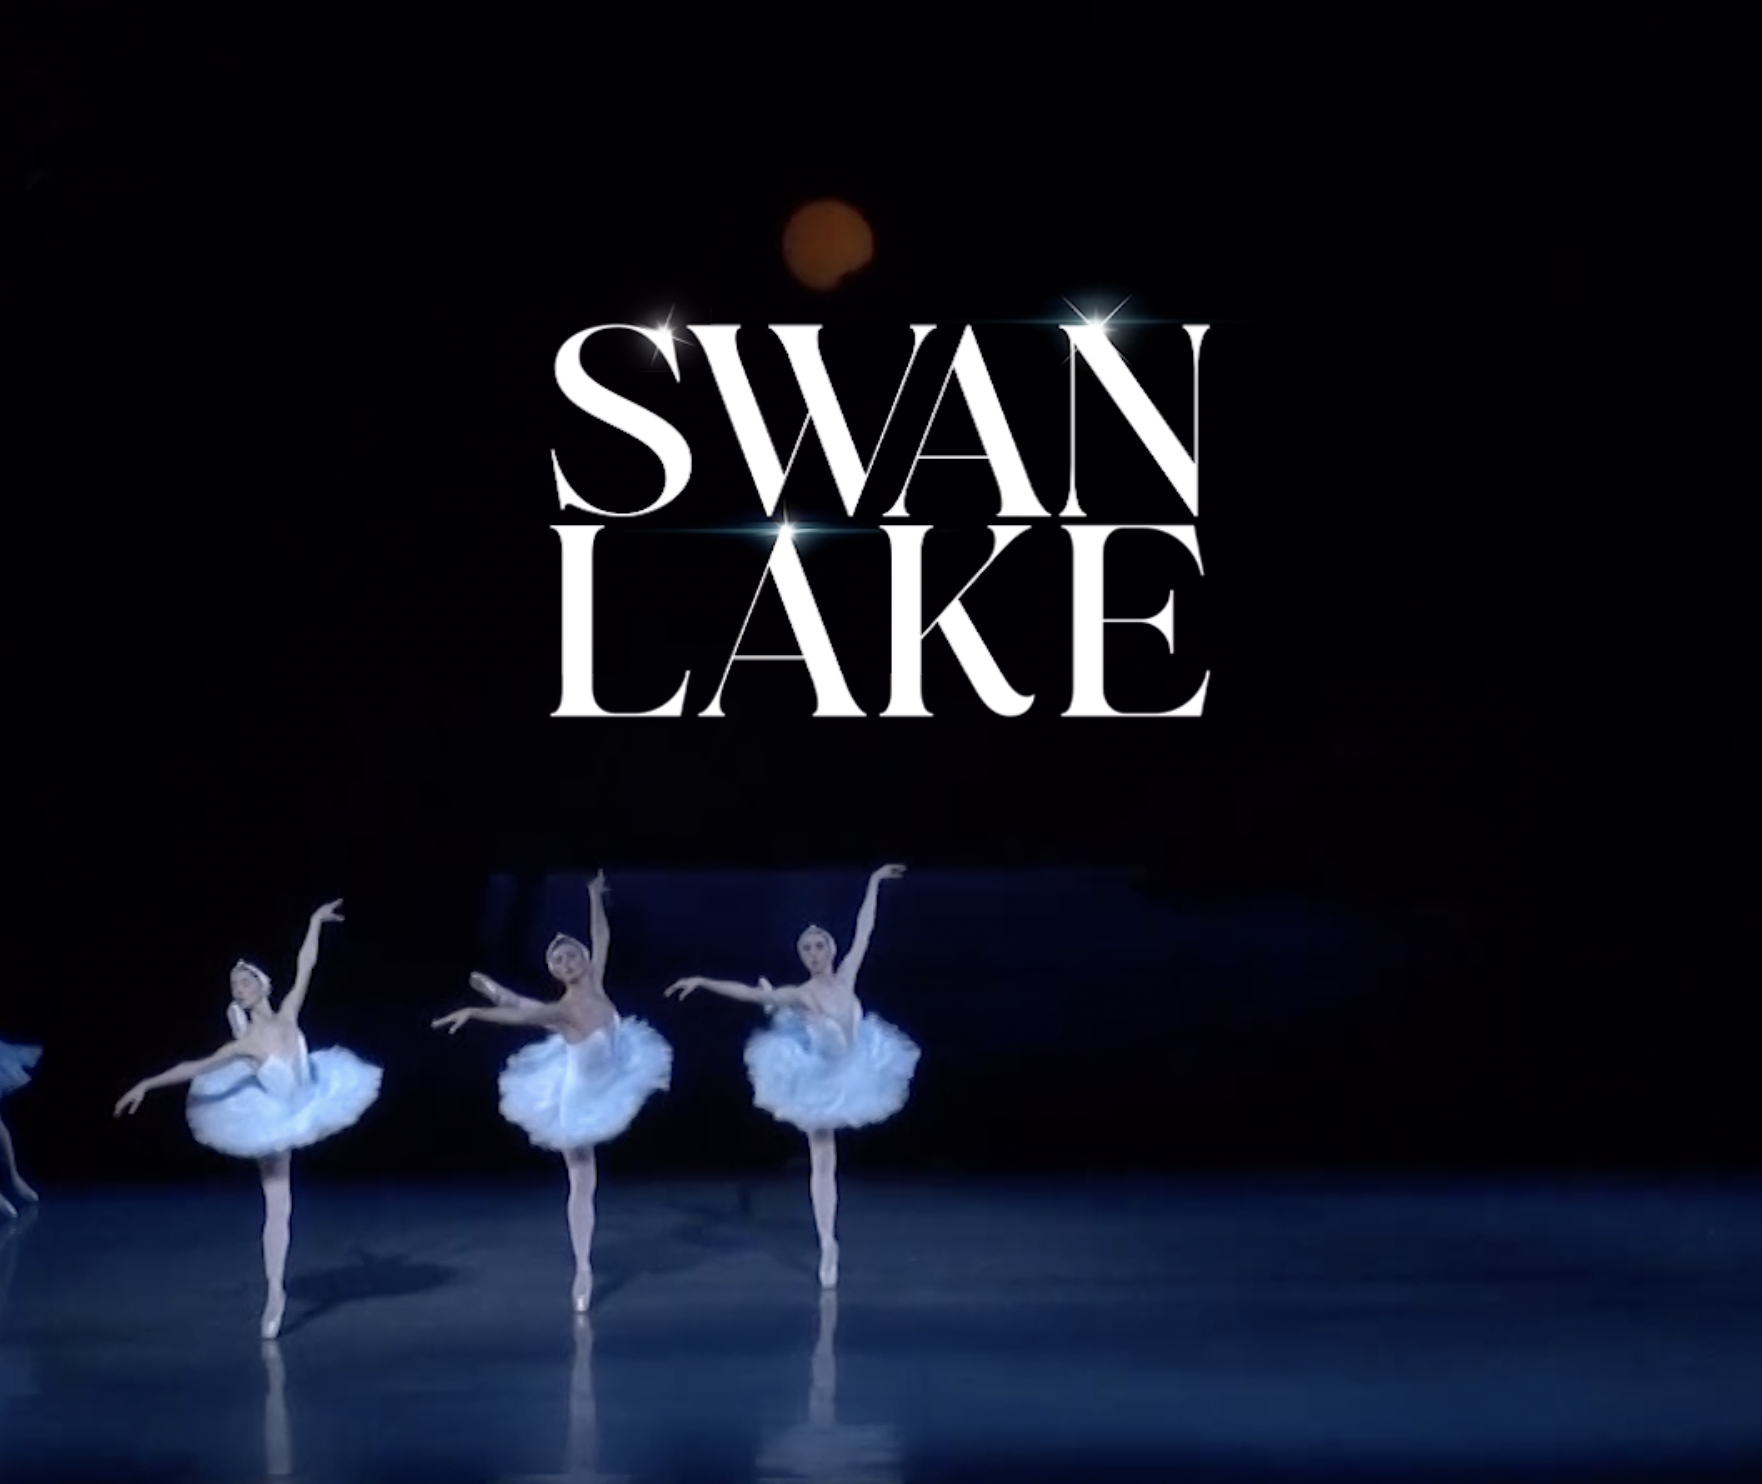 Swan Lake by The State Ballet of Georgia